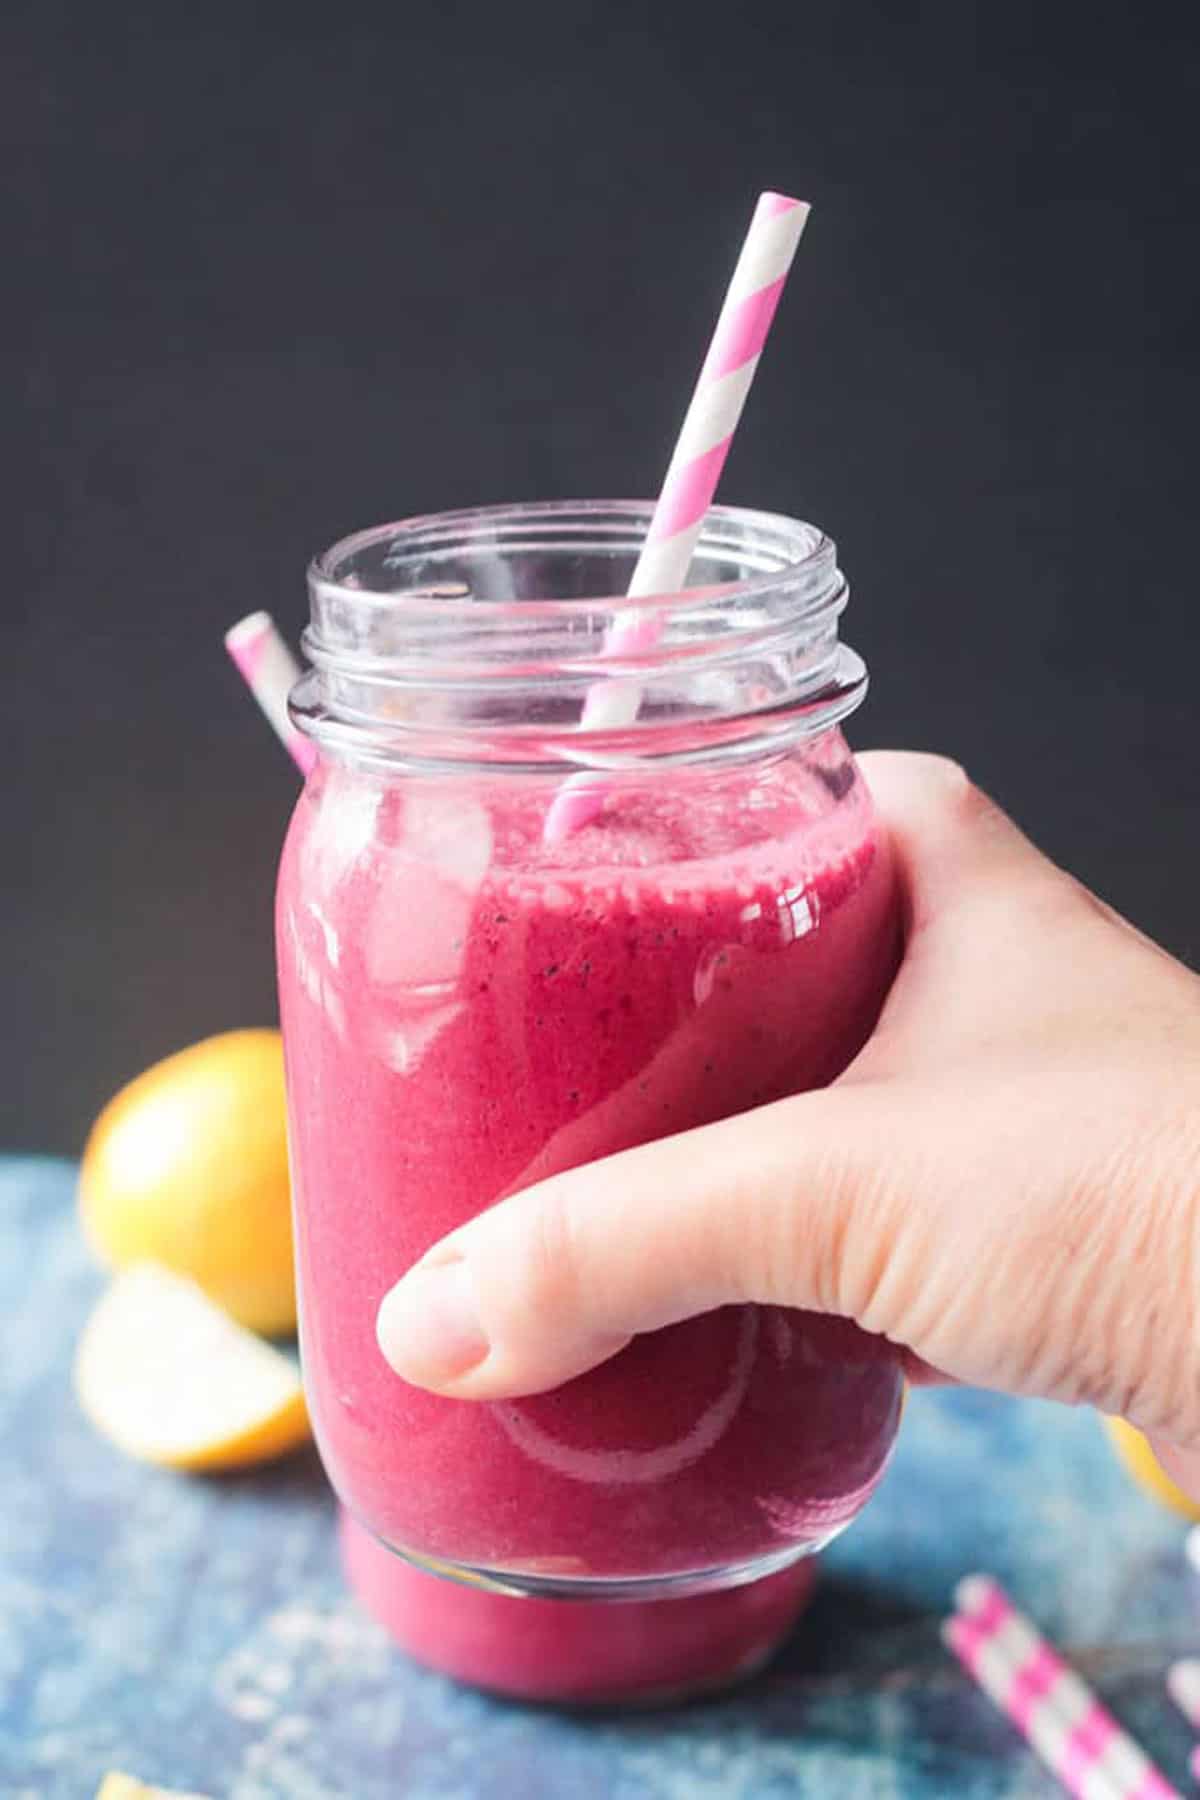 Hand holding up a pink strawberry beet smoothie.